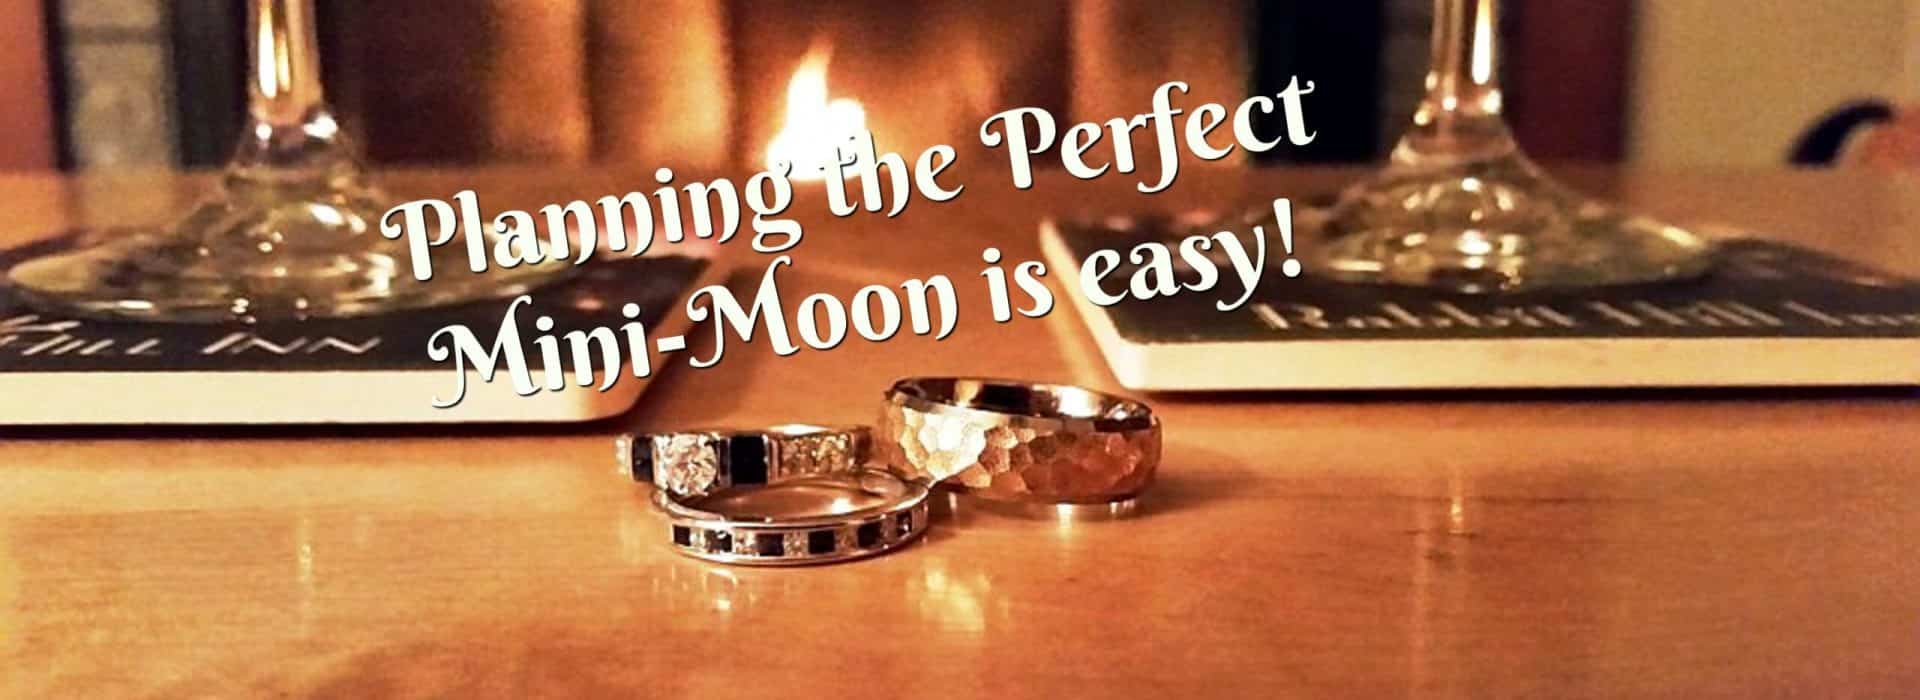 Mini Moon romantic getaway packages|5 step guide to planning the perfect mini-moon|Rabbit Hill Inn mini-moon packages|How to plan a mini-moon|Mini moon packages getaways